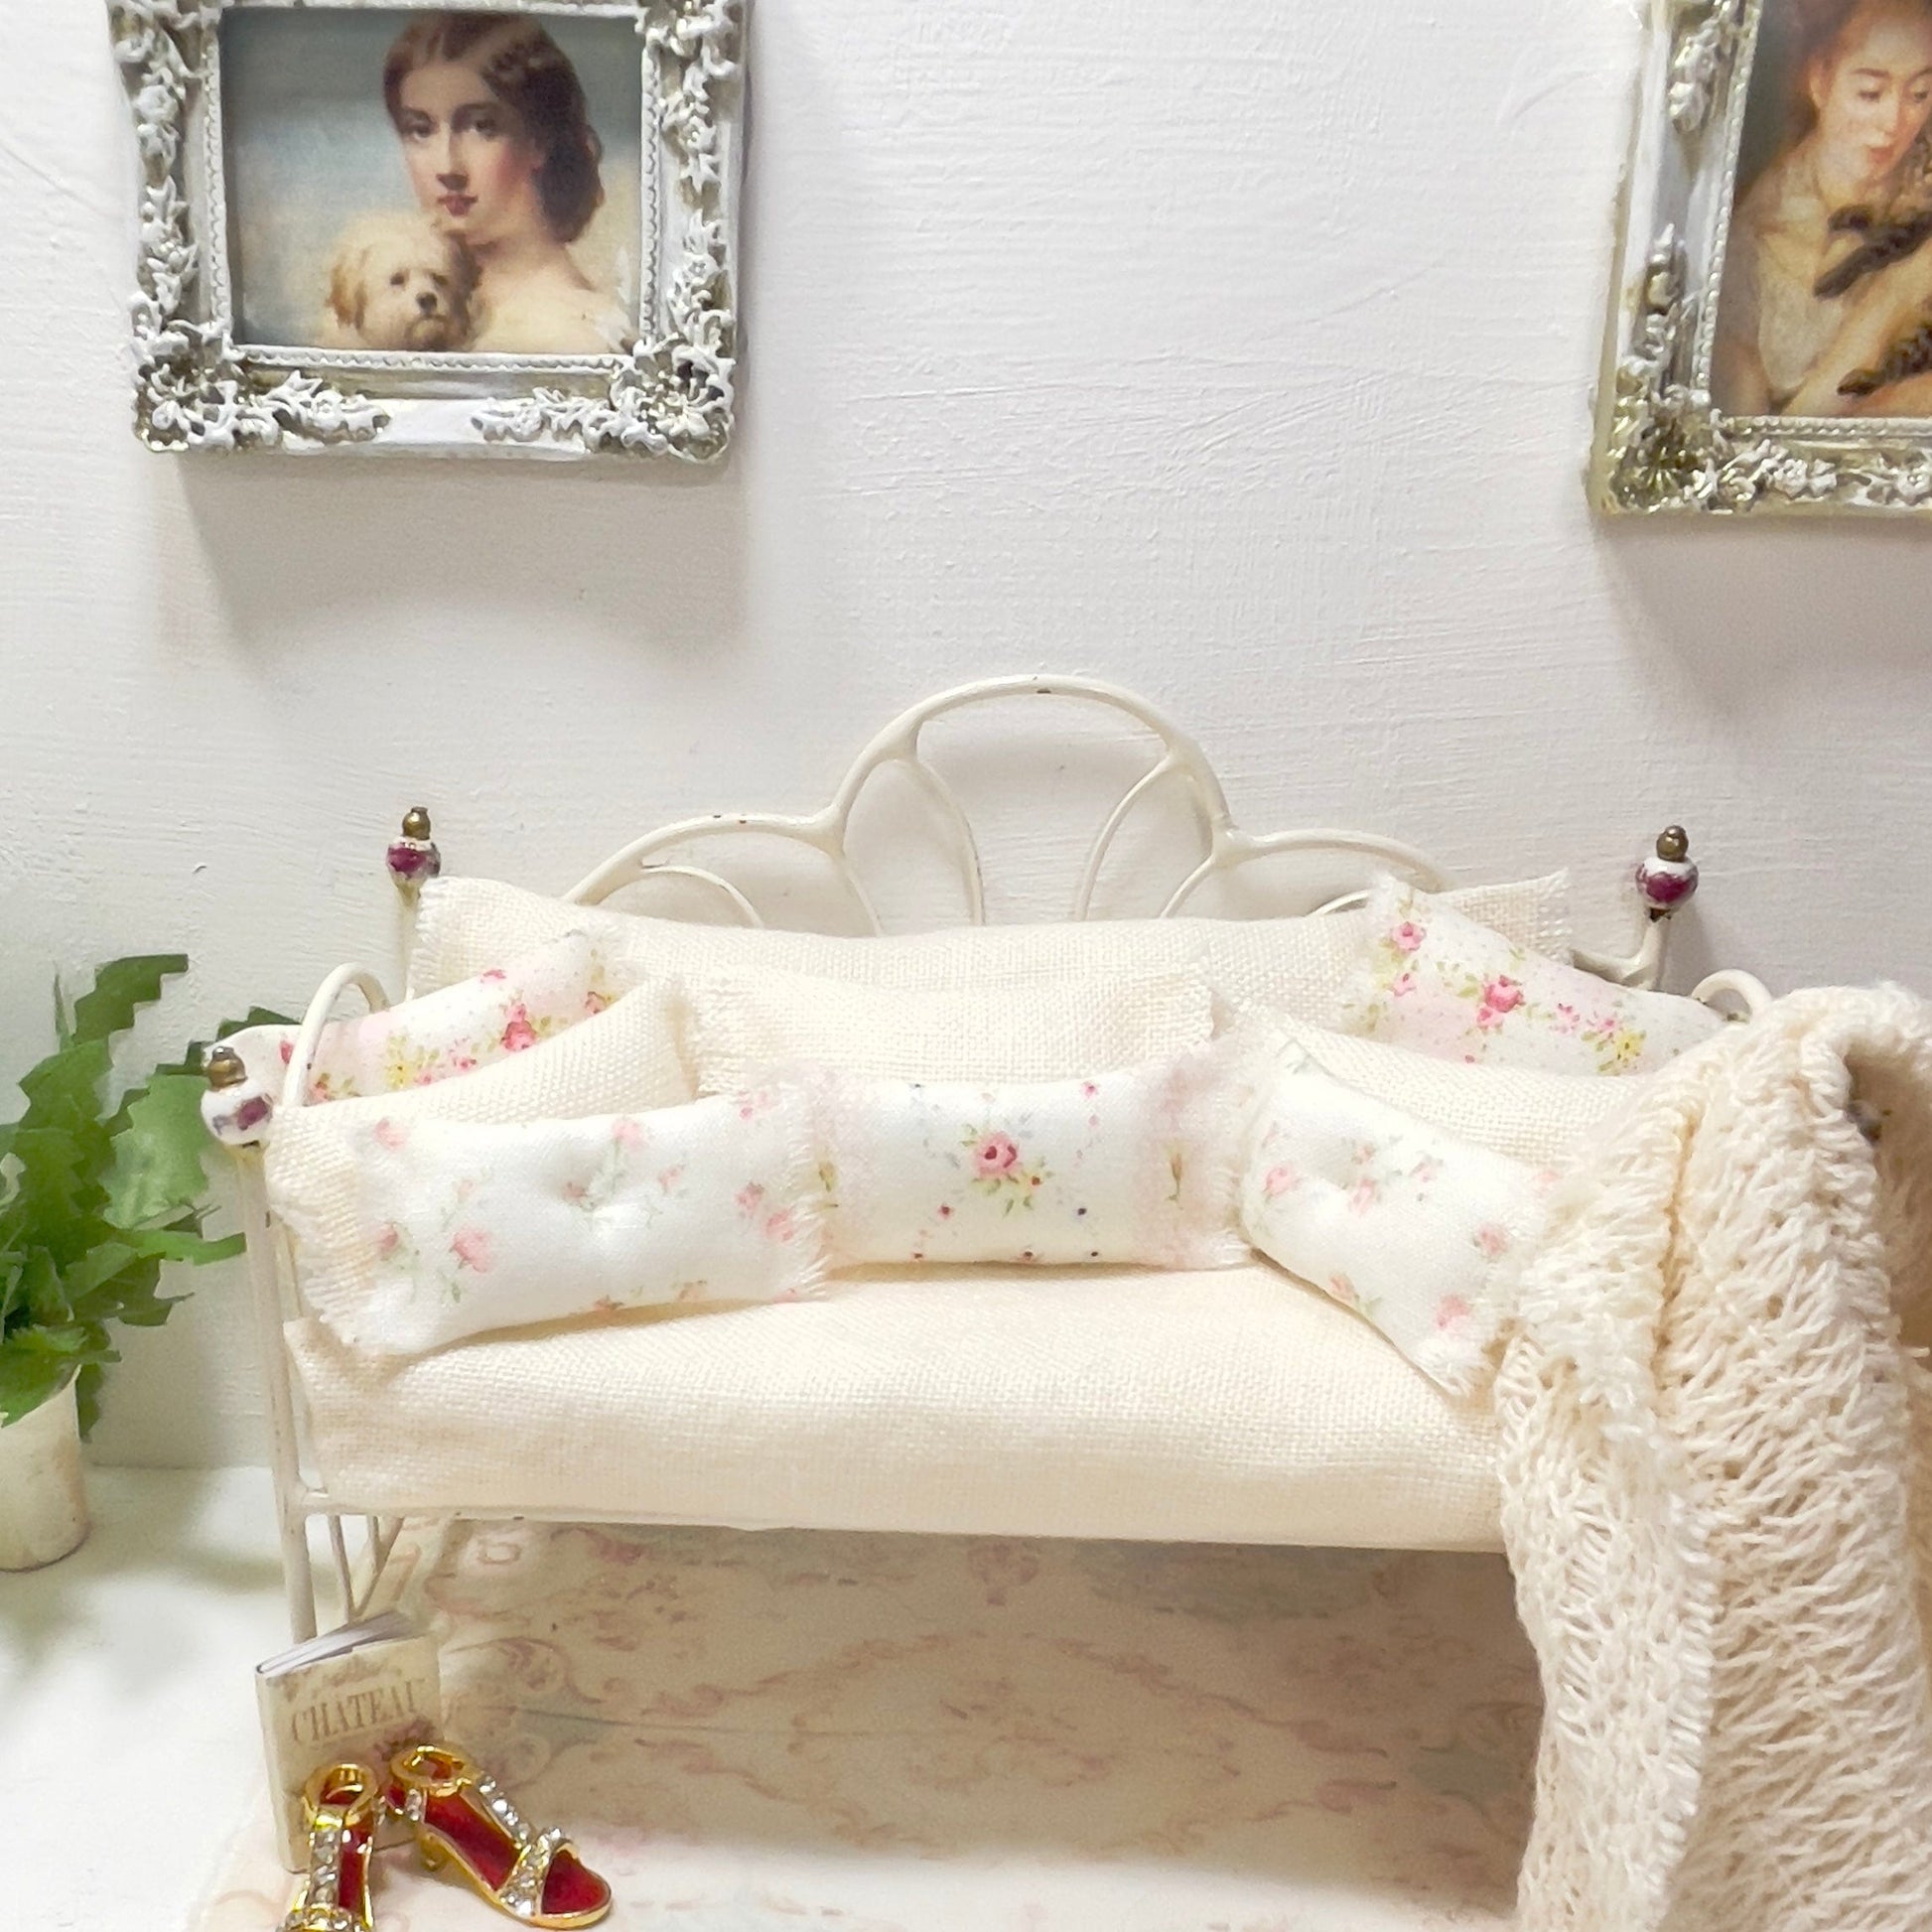 Chantallena Doll House Day Bed | Tea Dyed Linen wuth Petite Pink Roses 1:12 Scale Dollhouse Set | Floral Vintage Cream